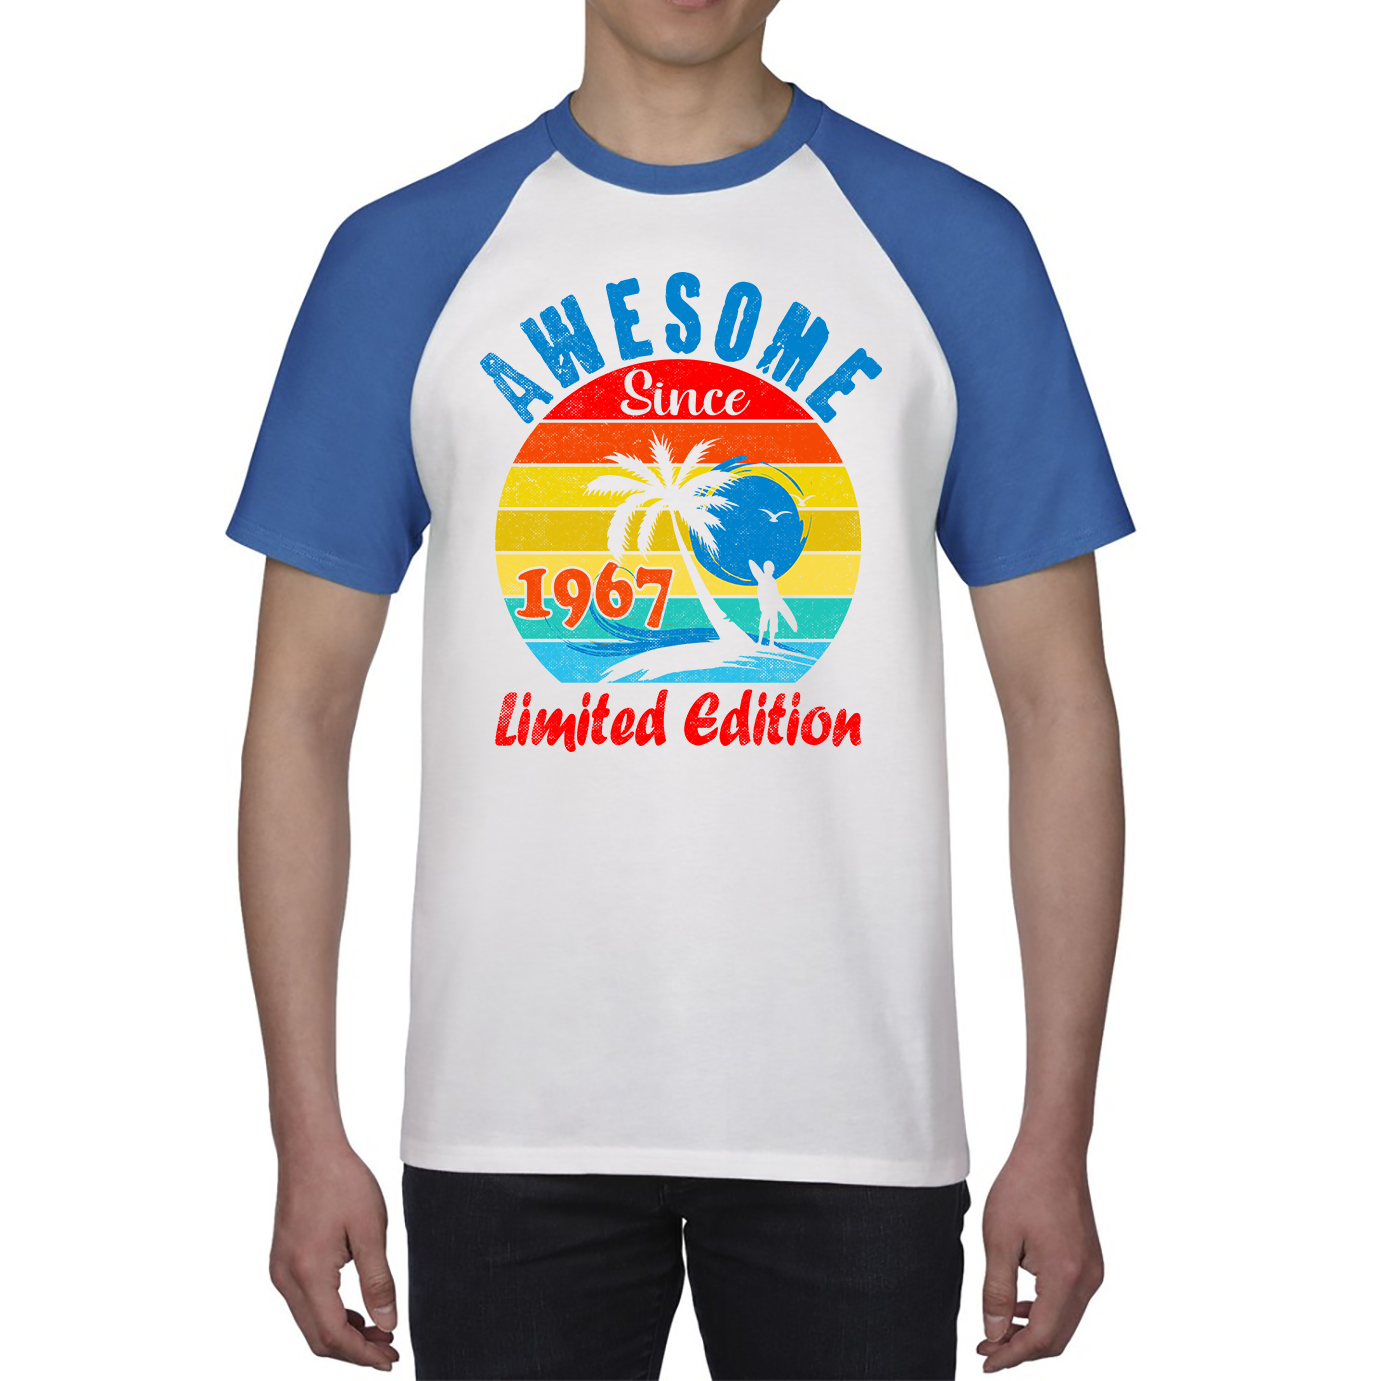 Awesome Since 1967 Limited Edition Shirt Vintage A Cool Palm Tree Beach Sunset Baseball T Shirt